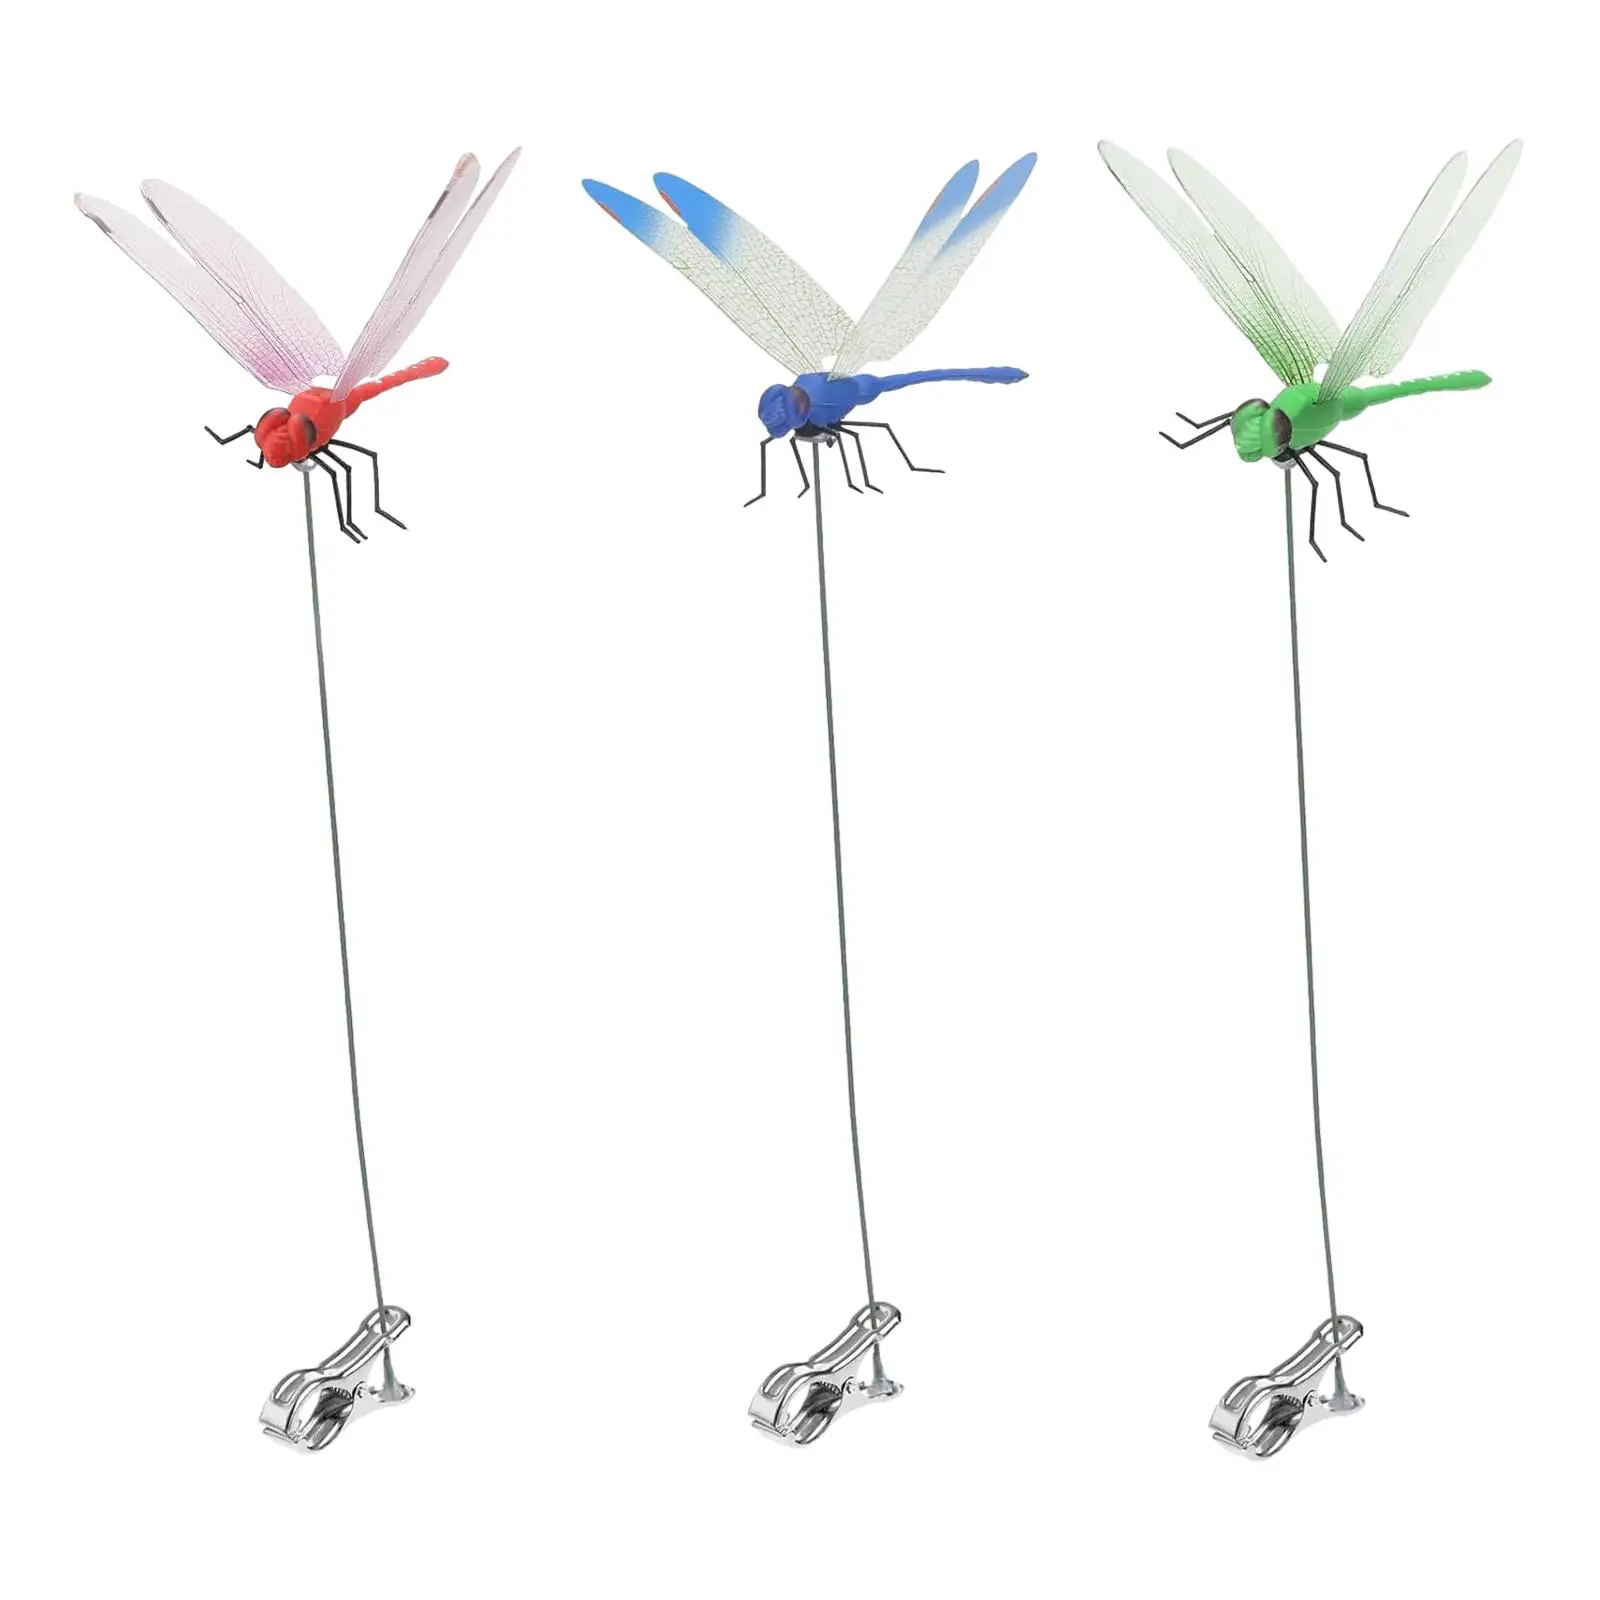 3Pcs Artificial Dragonfly Stakes Gardening Decoration Crafts Fake Dragonfly Clip for Flower Pot Outdoor Garden Indoor Planter